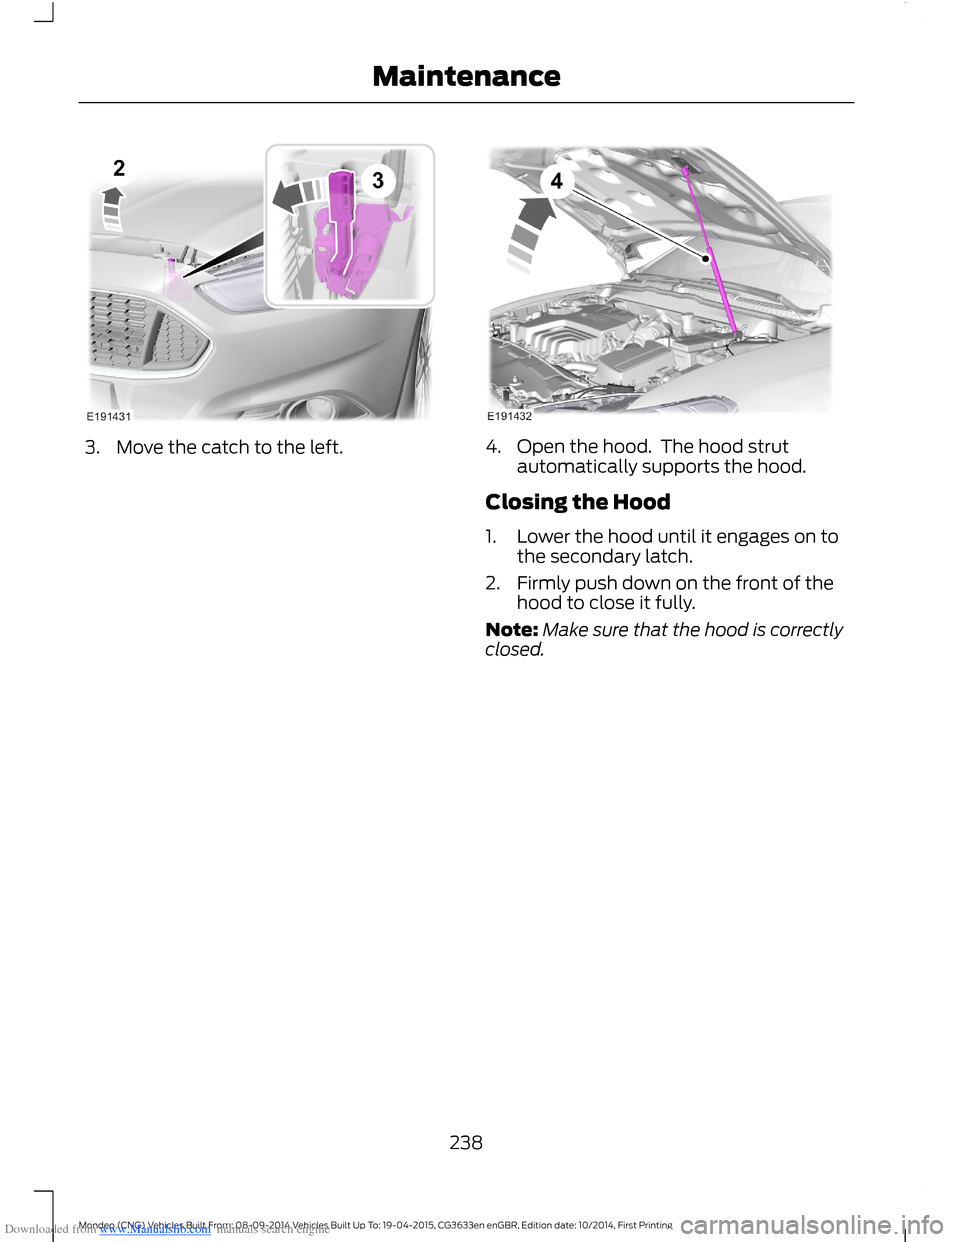 FORD MONDEO 2014 4.G Owners Manual Downloaded from www.Manualslib.com manuals search engine 3.Move the catch to the left.4.Open the hood.  The hood strutautomatically supports the hood.
Closing the Hood
1.Lower the hood until it engage